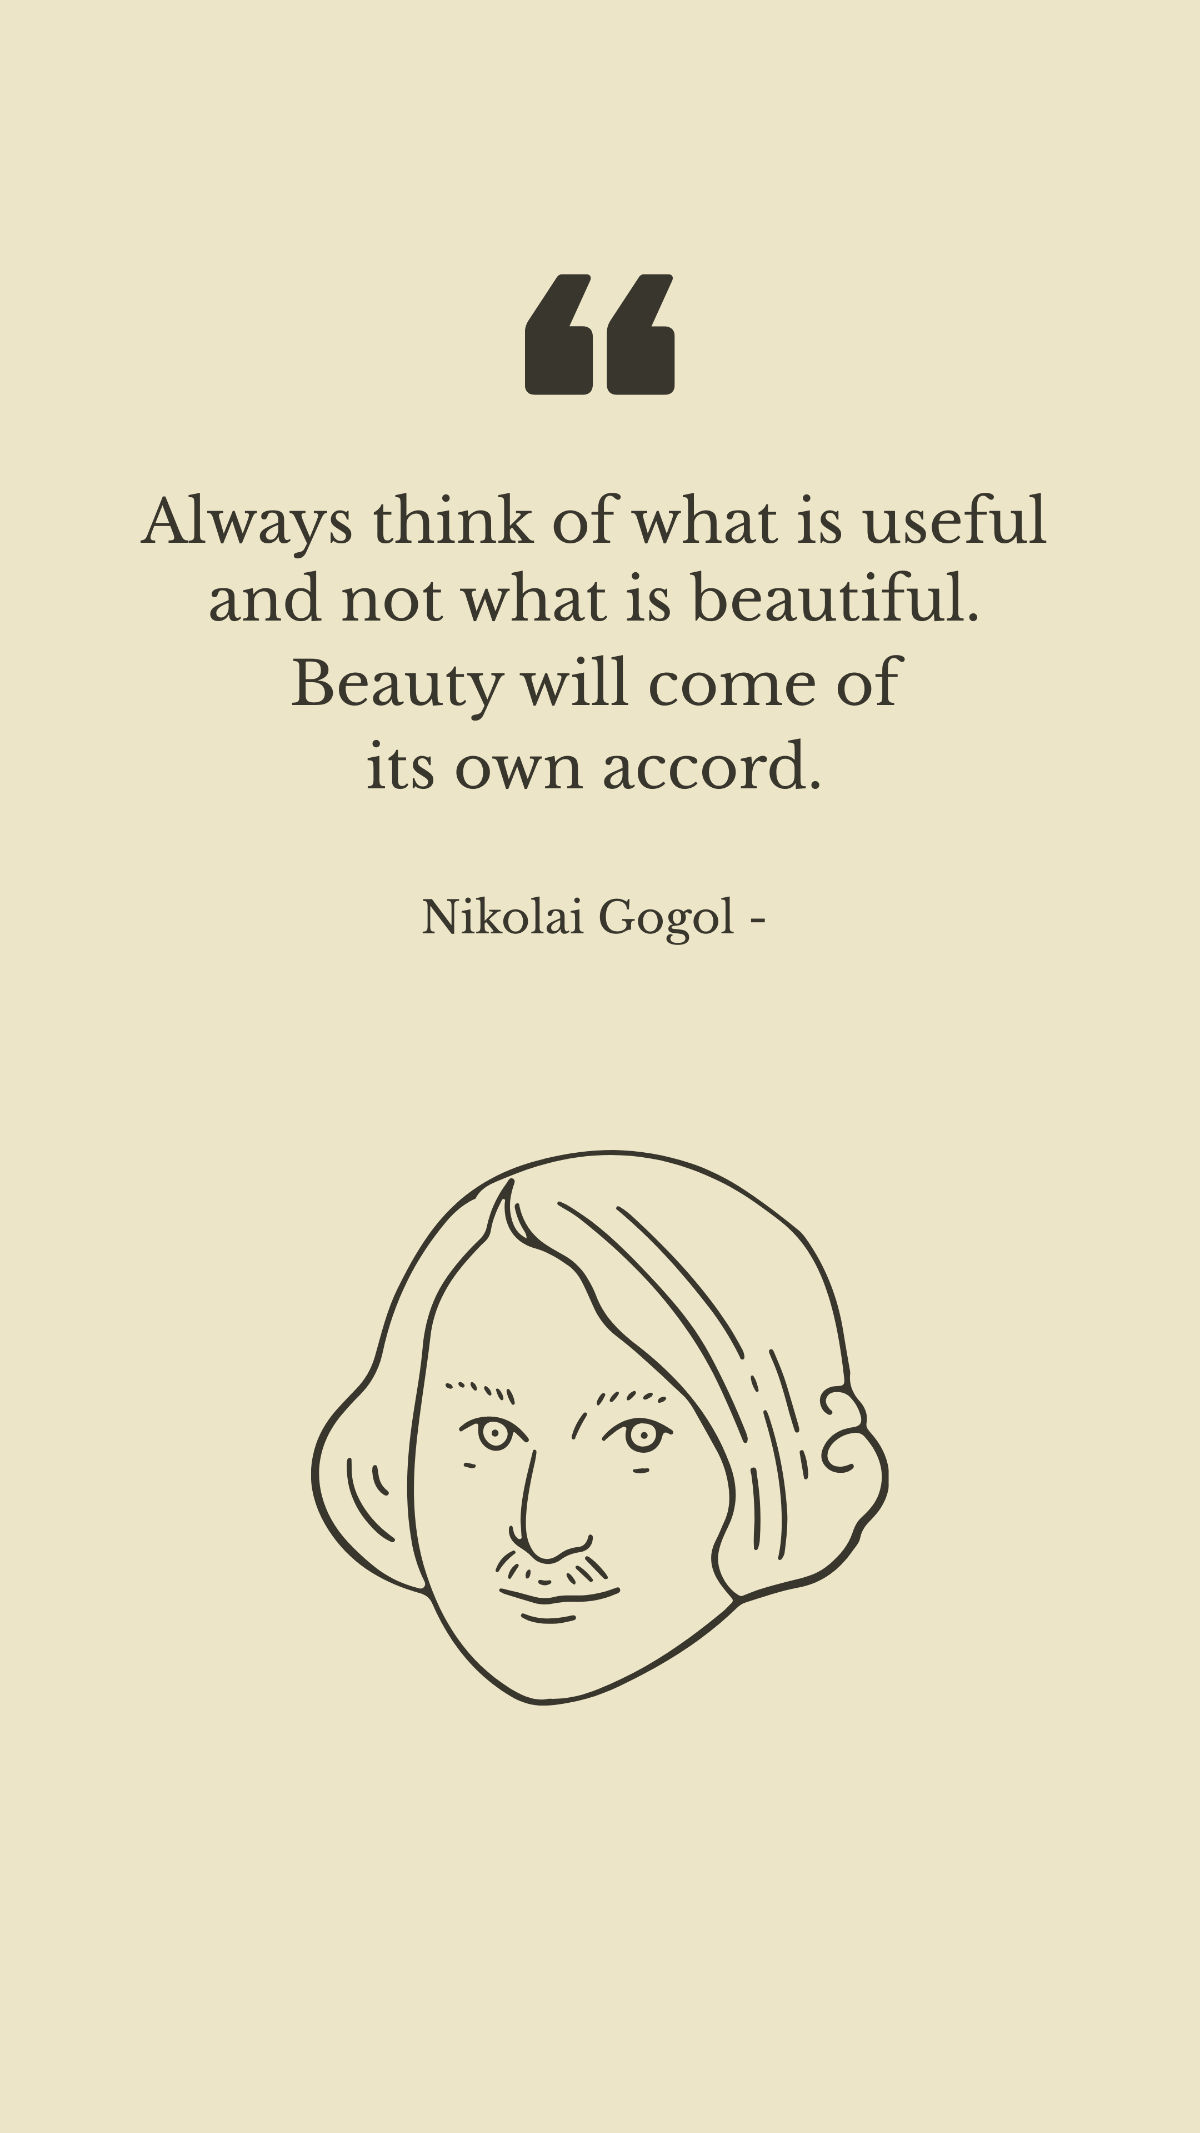 Free Nikolai Gogol - Always think of what is useful and not what is beautiful. Beauty will come of its own accord. Template